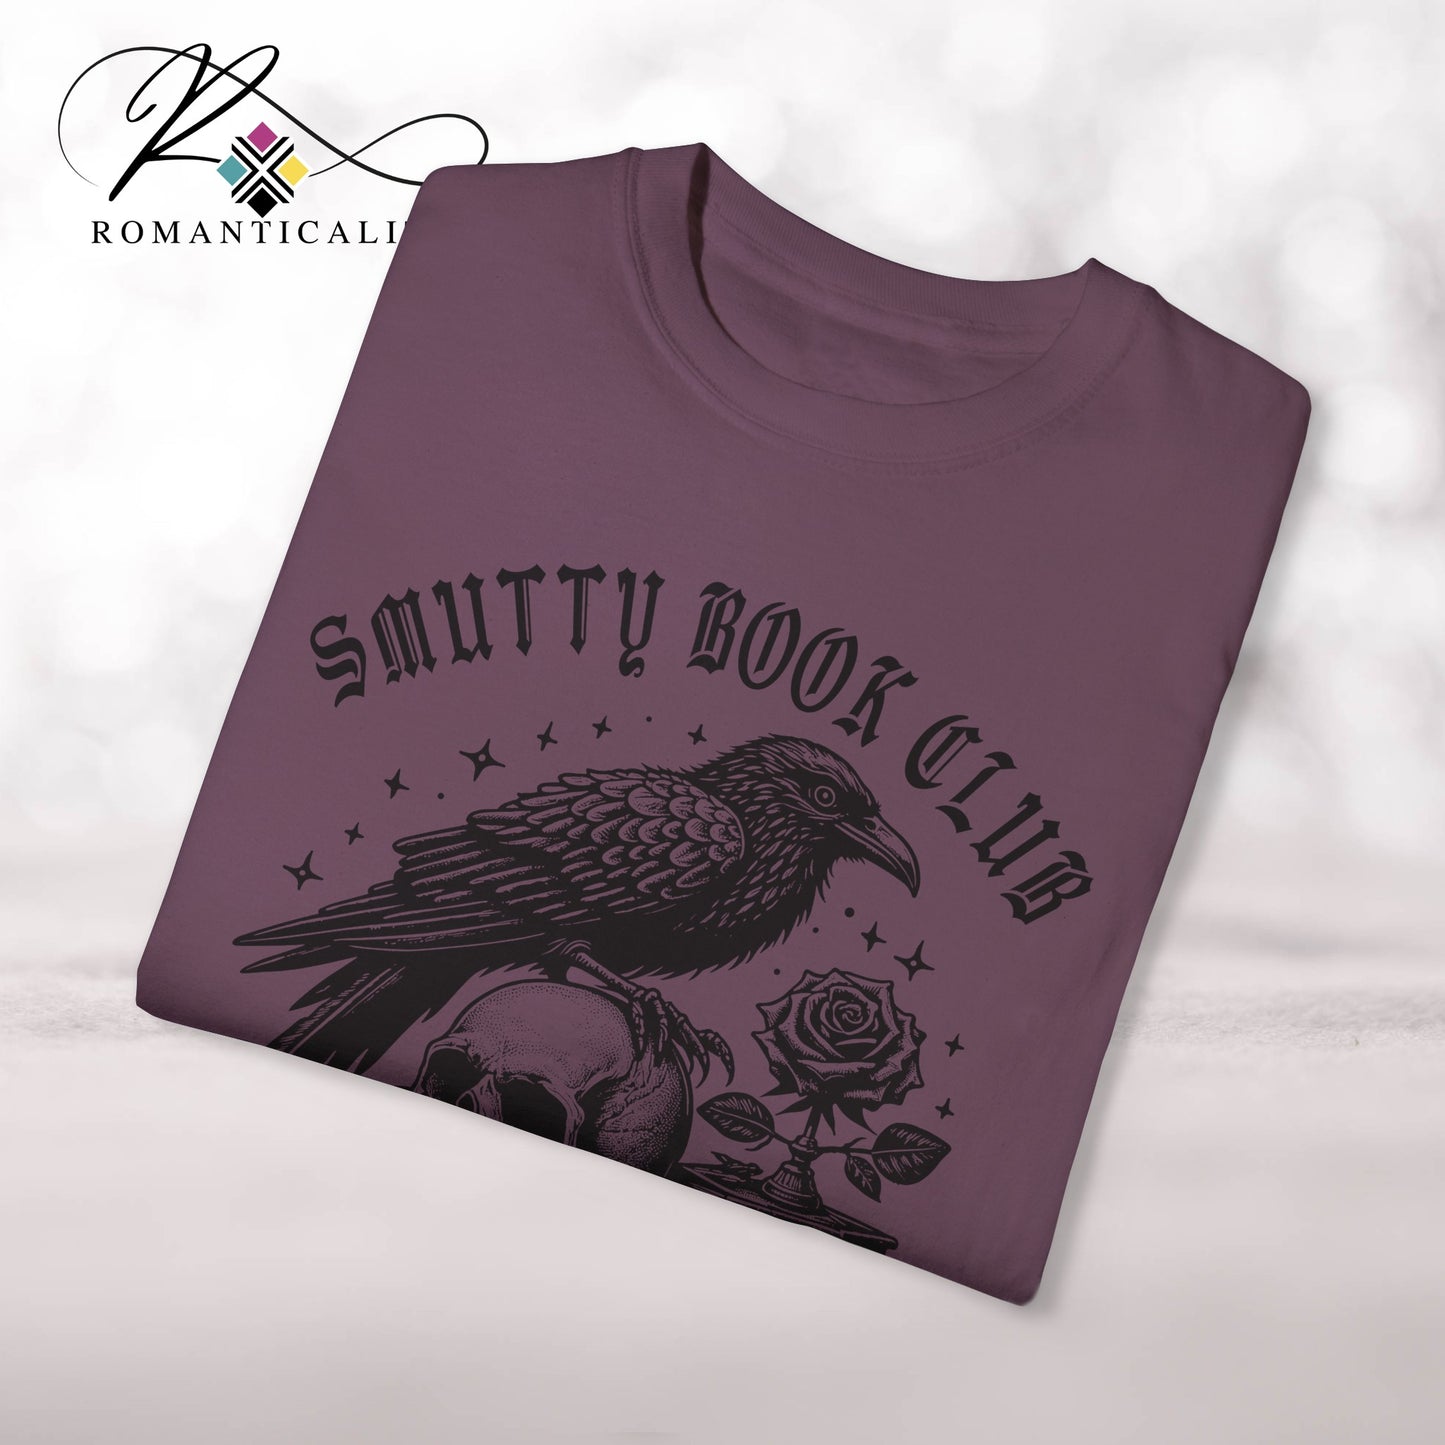 Smutty Book Club Graphic Reader Tee-Comfortable Book Lover T-Shirt-Gift for Readers/Writers